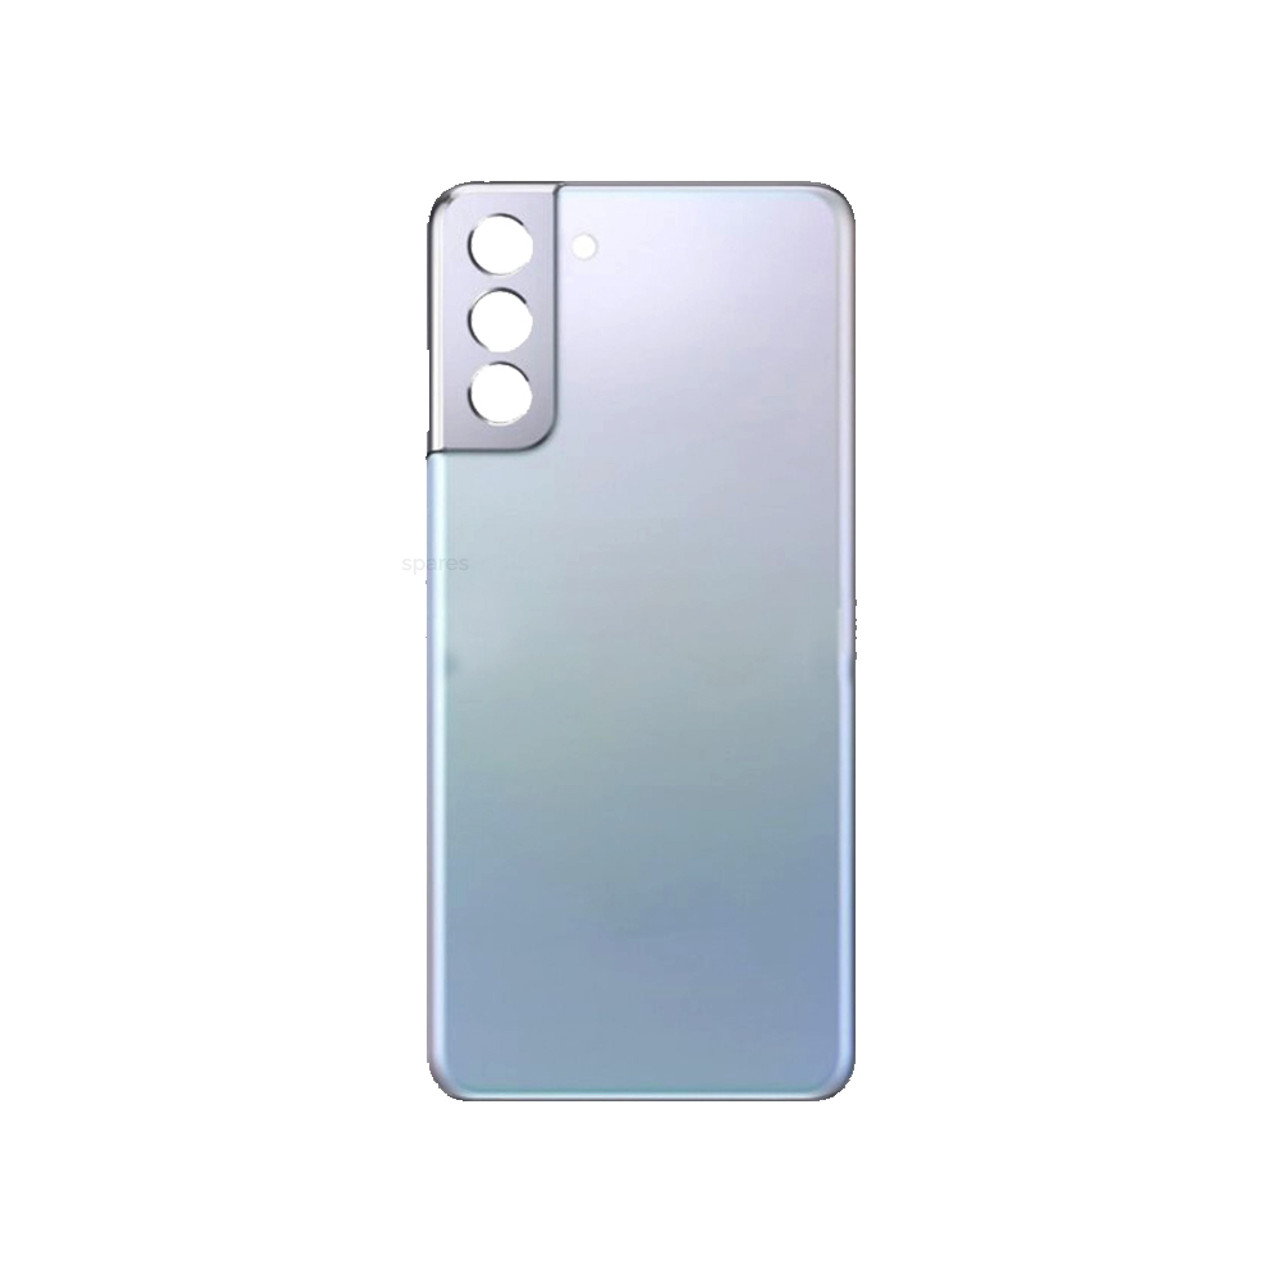 Galaxy S21 Plus 5G SM-G996B Rear glass battery cover with camera lens Phantom Silver - Replacement